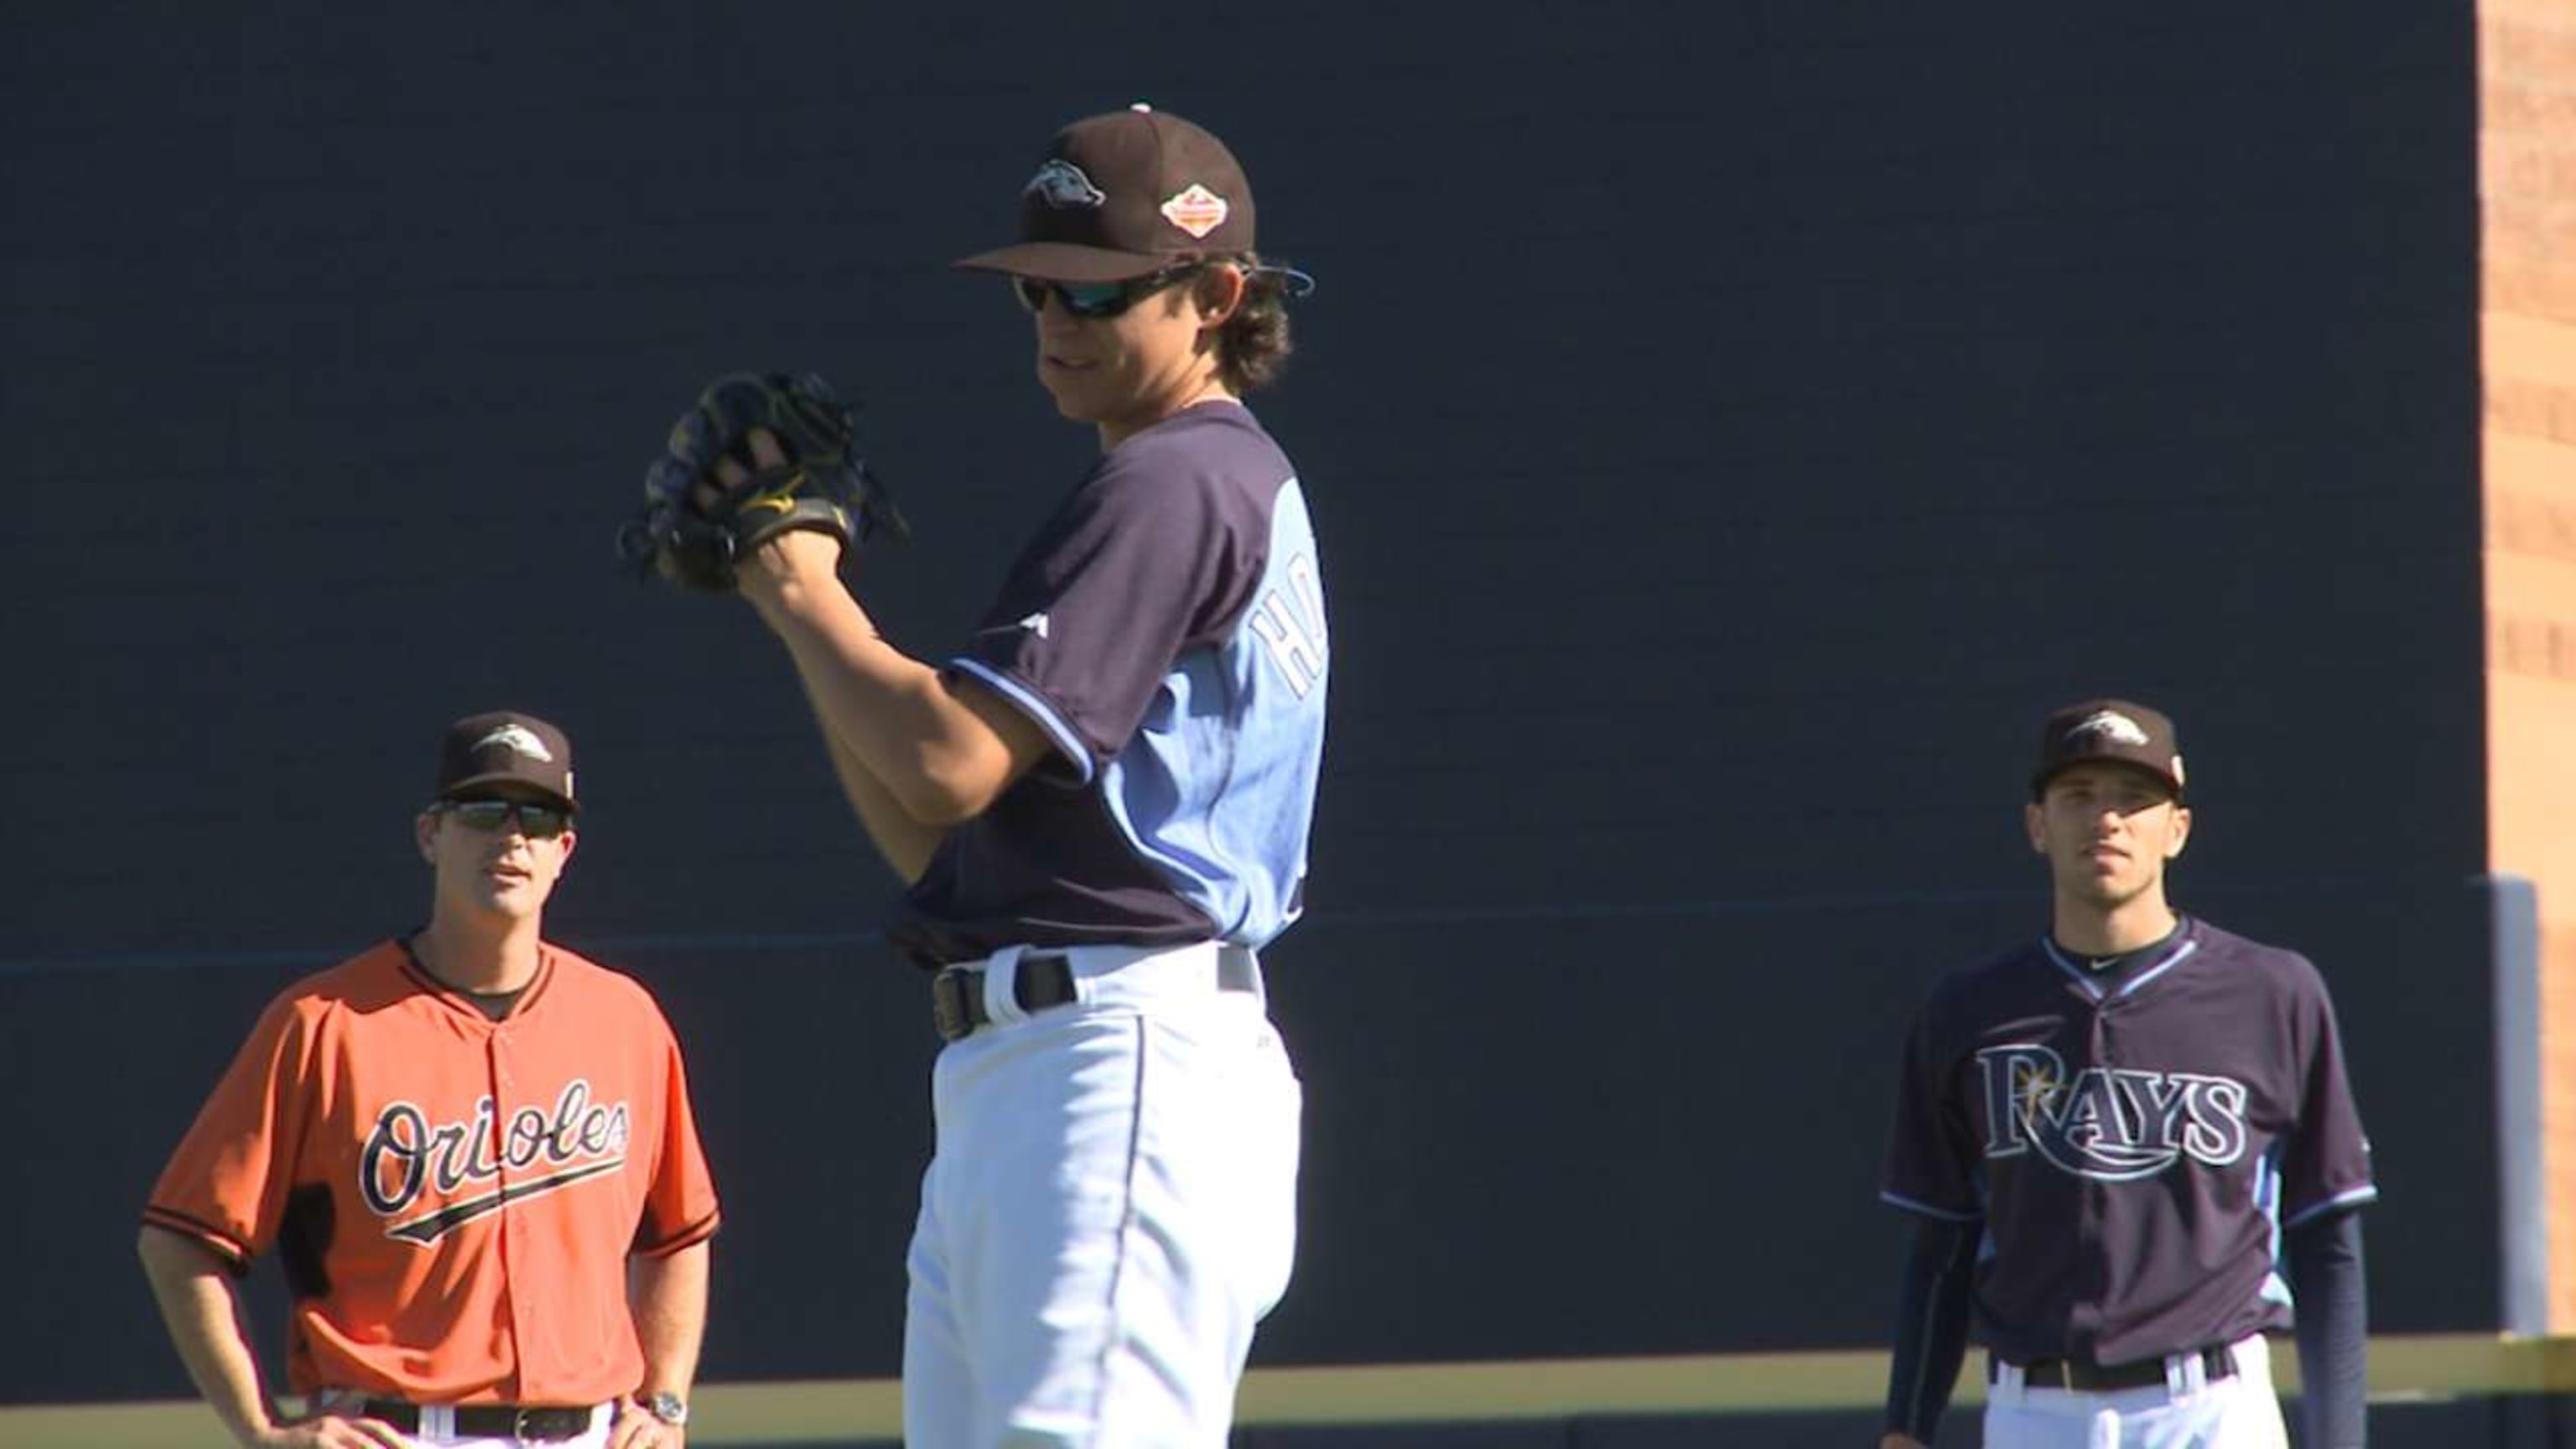 Rays prospect Brent Honeywell shines at All-Star Futures Game